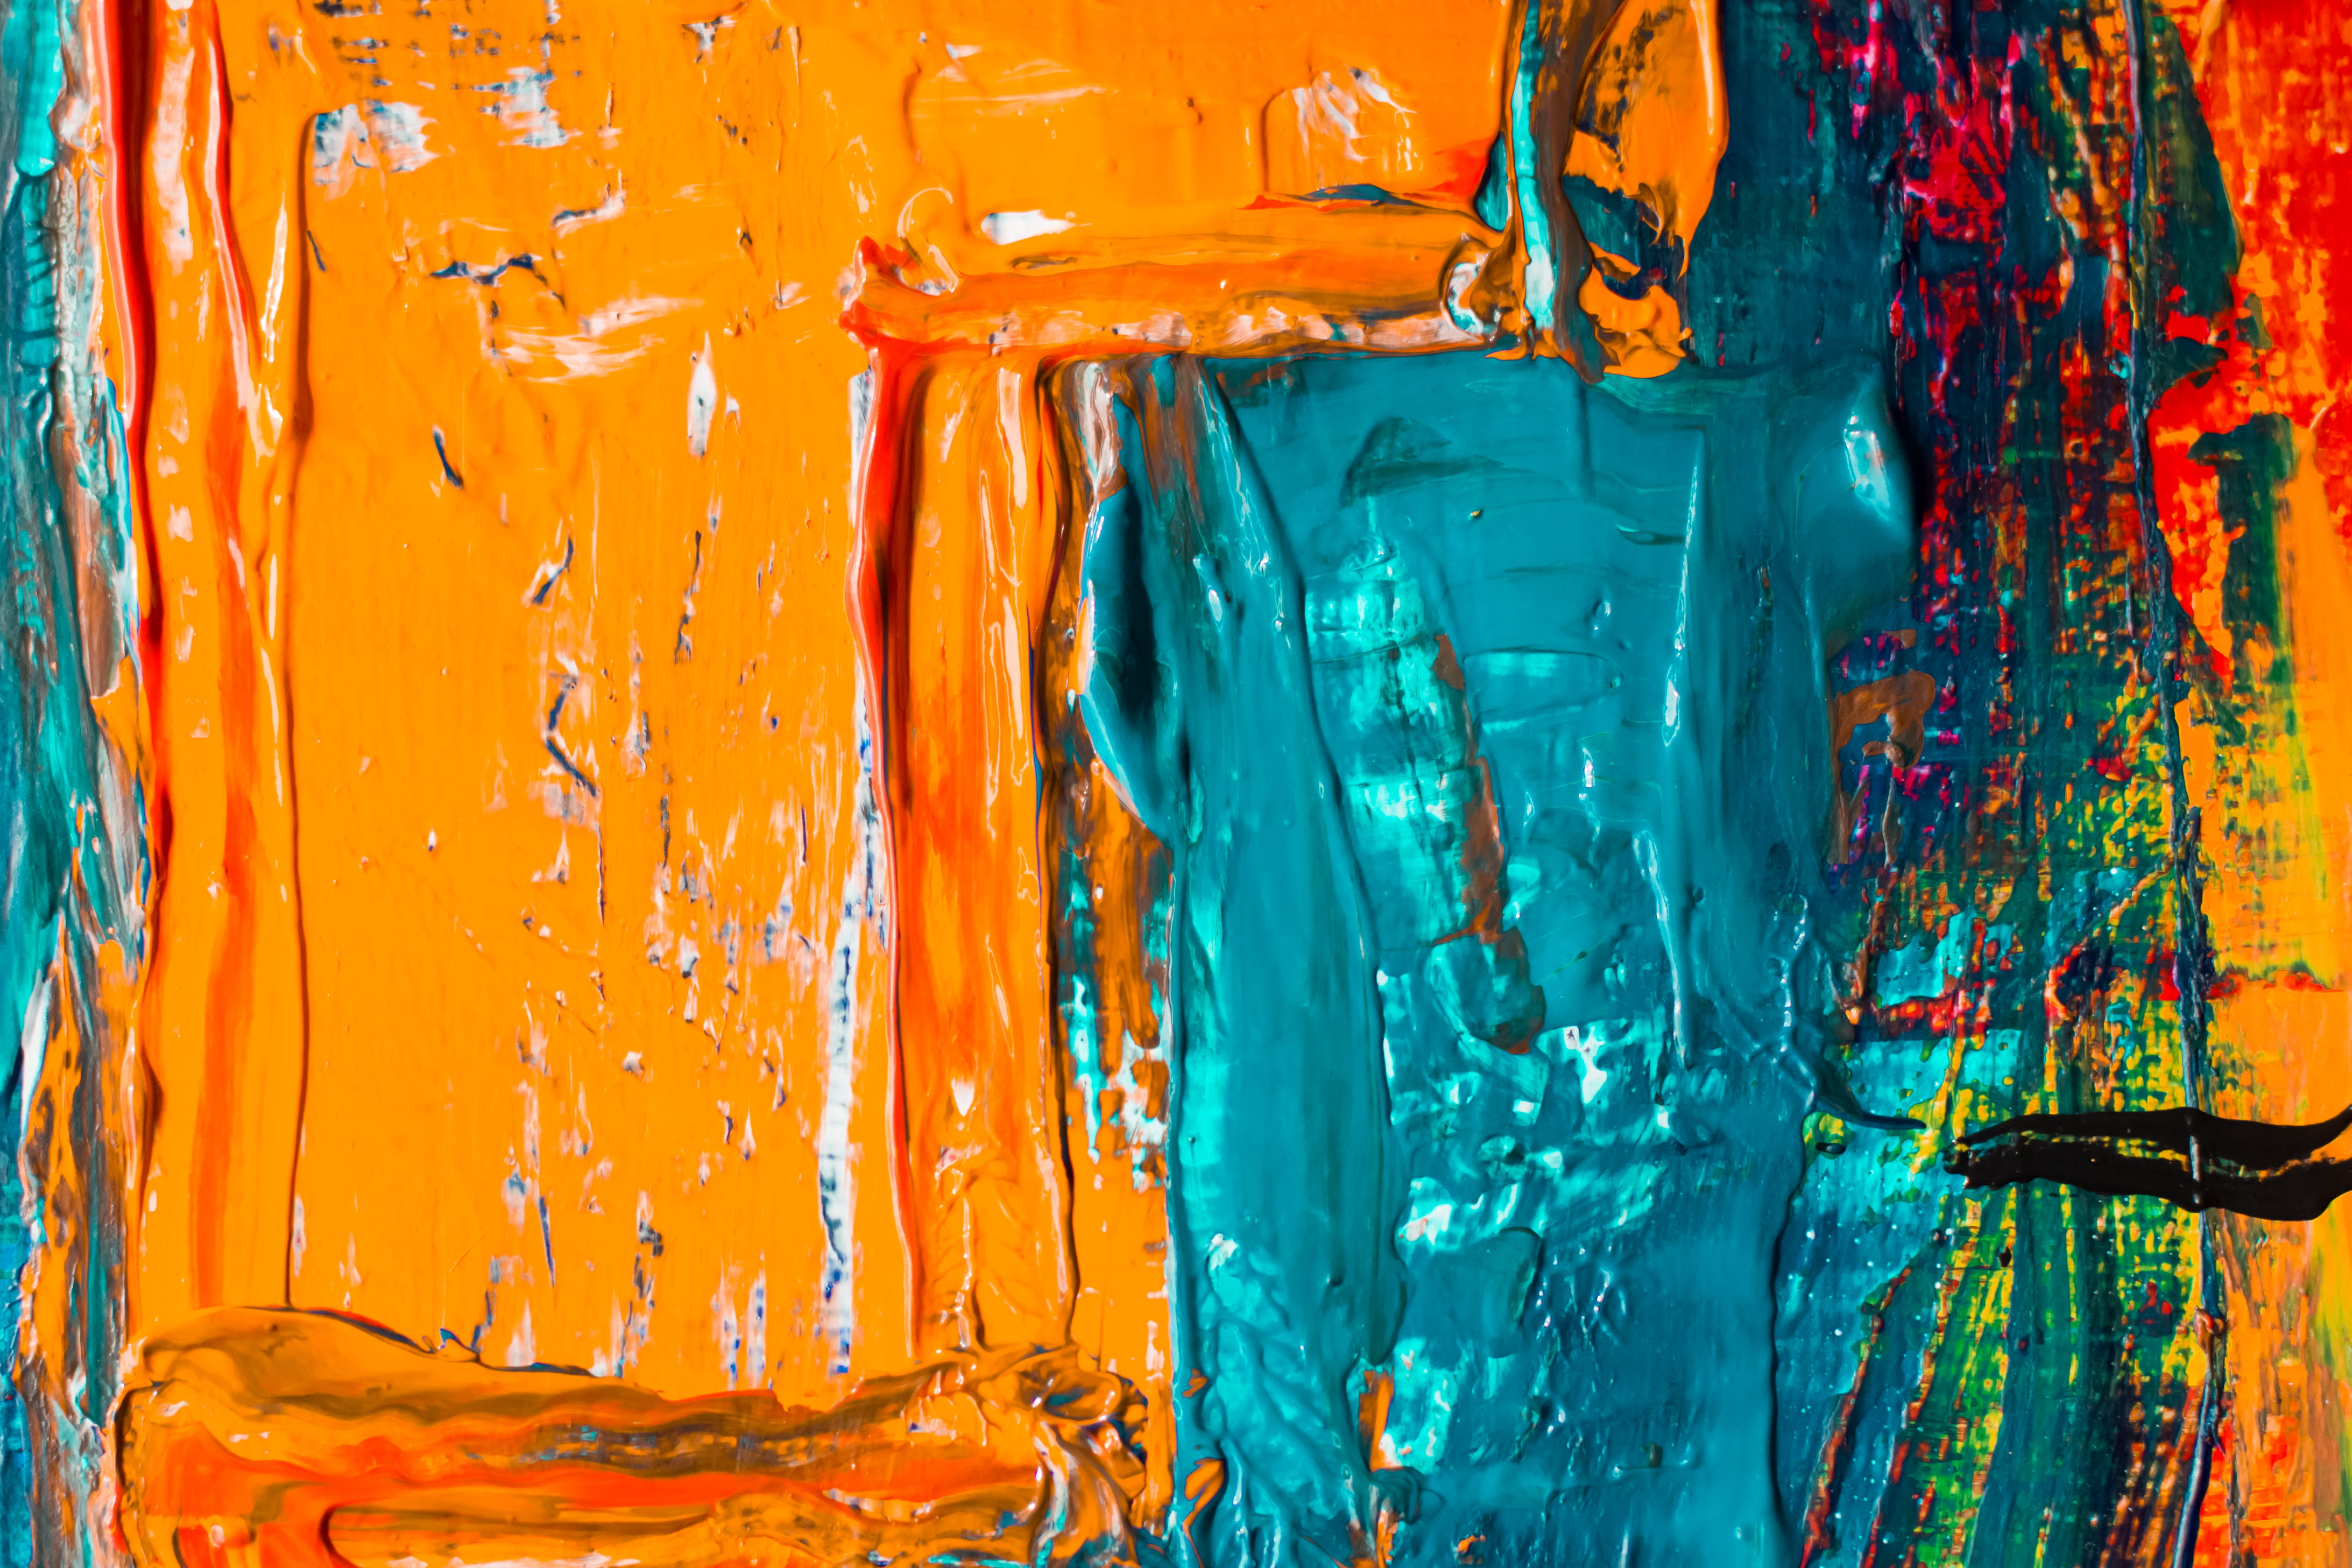 Orange and Blue Abstract Painting, art, artistic, bright, chaos